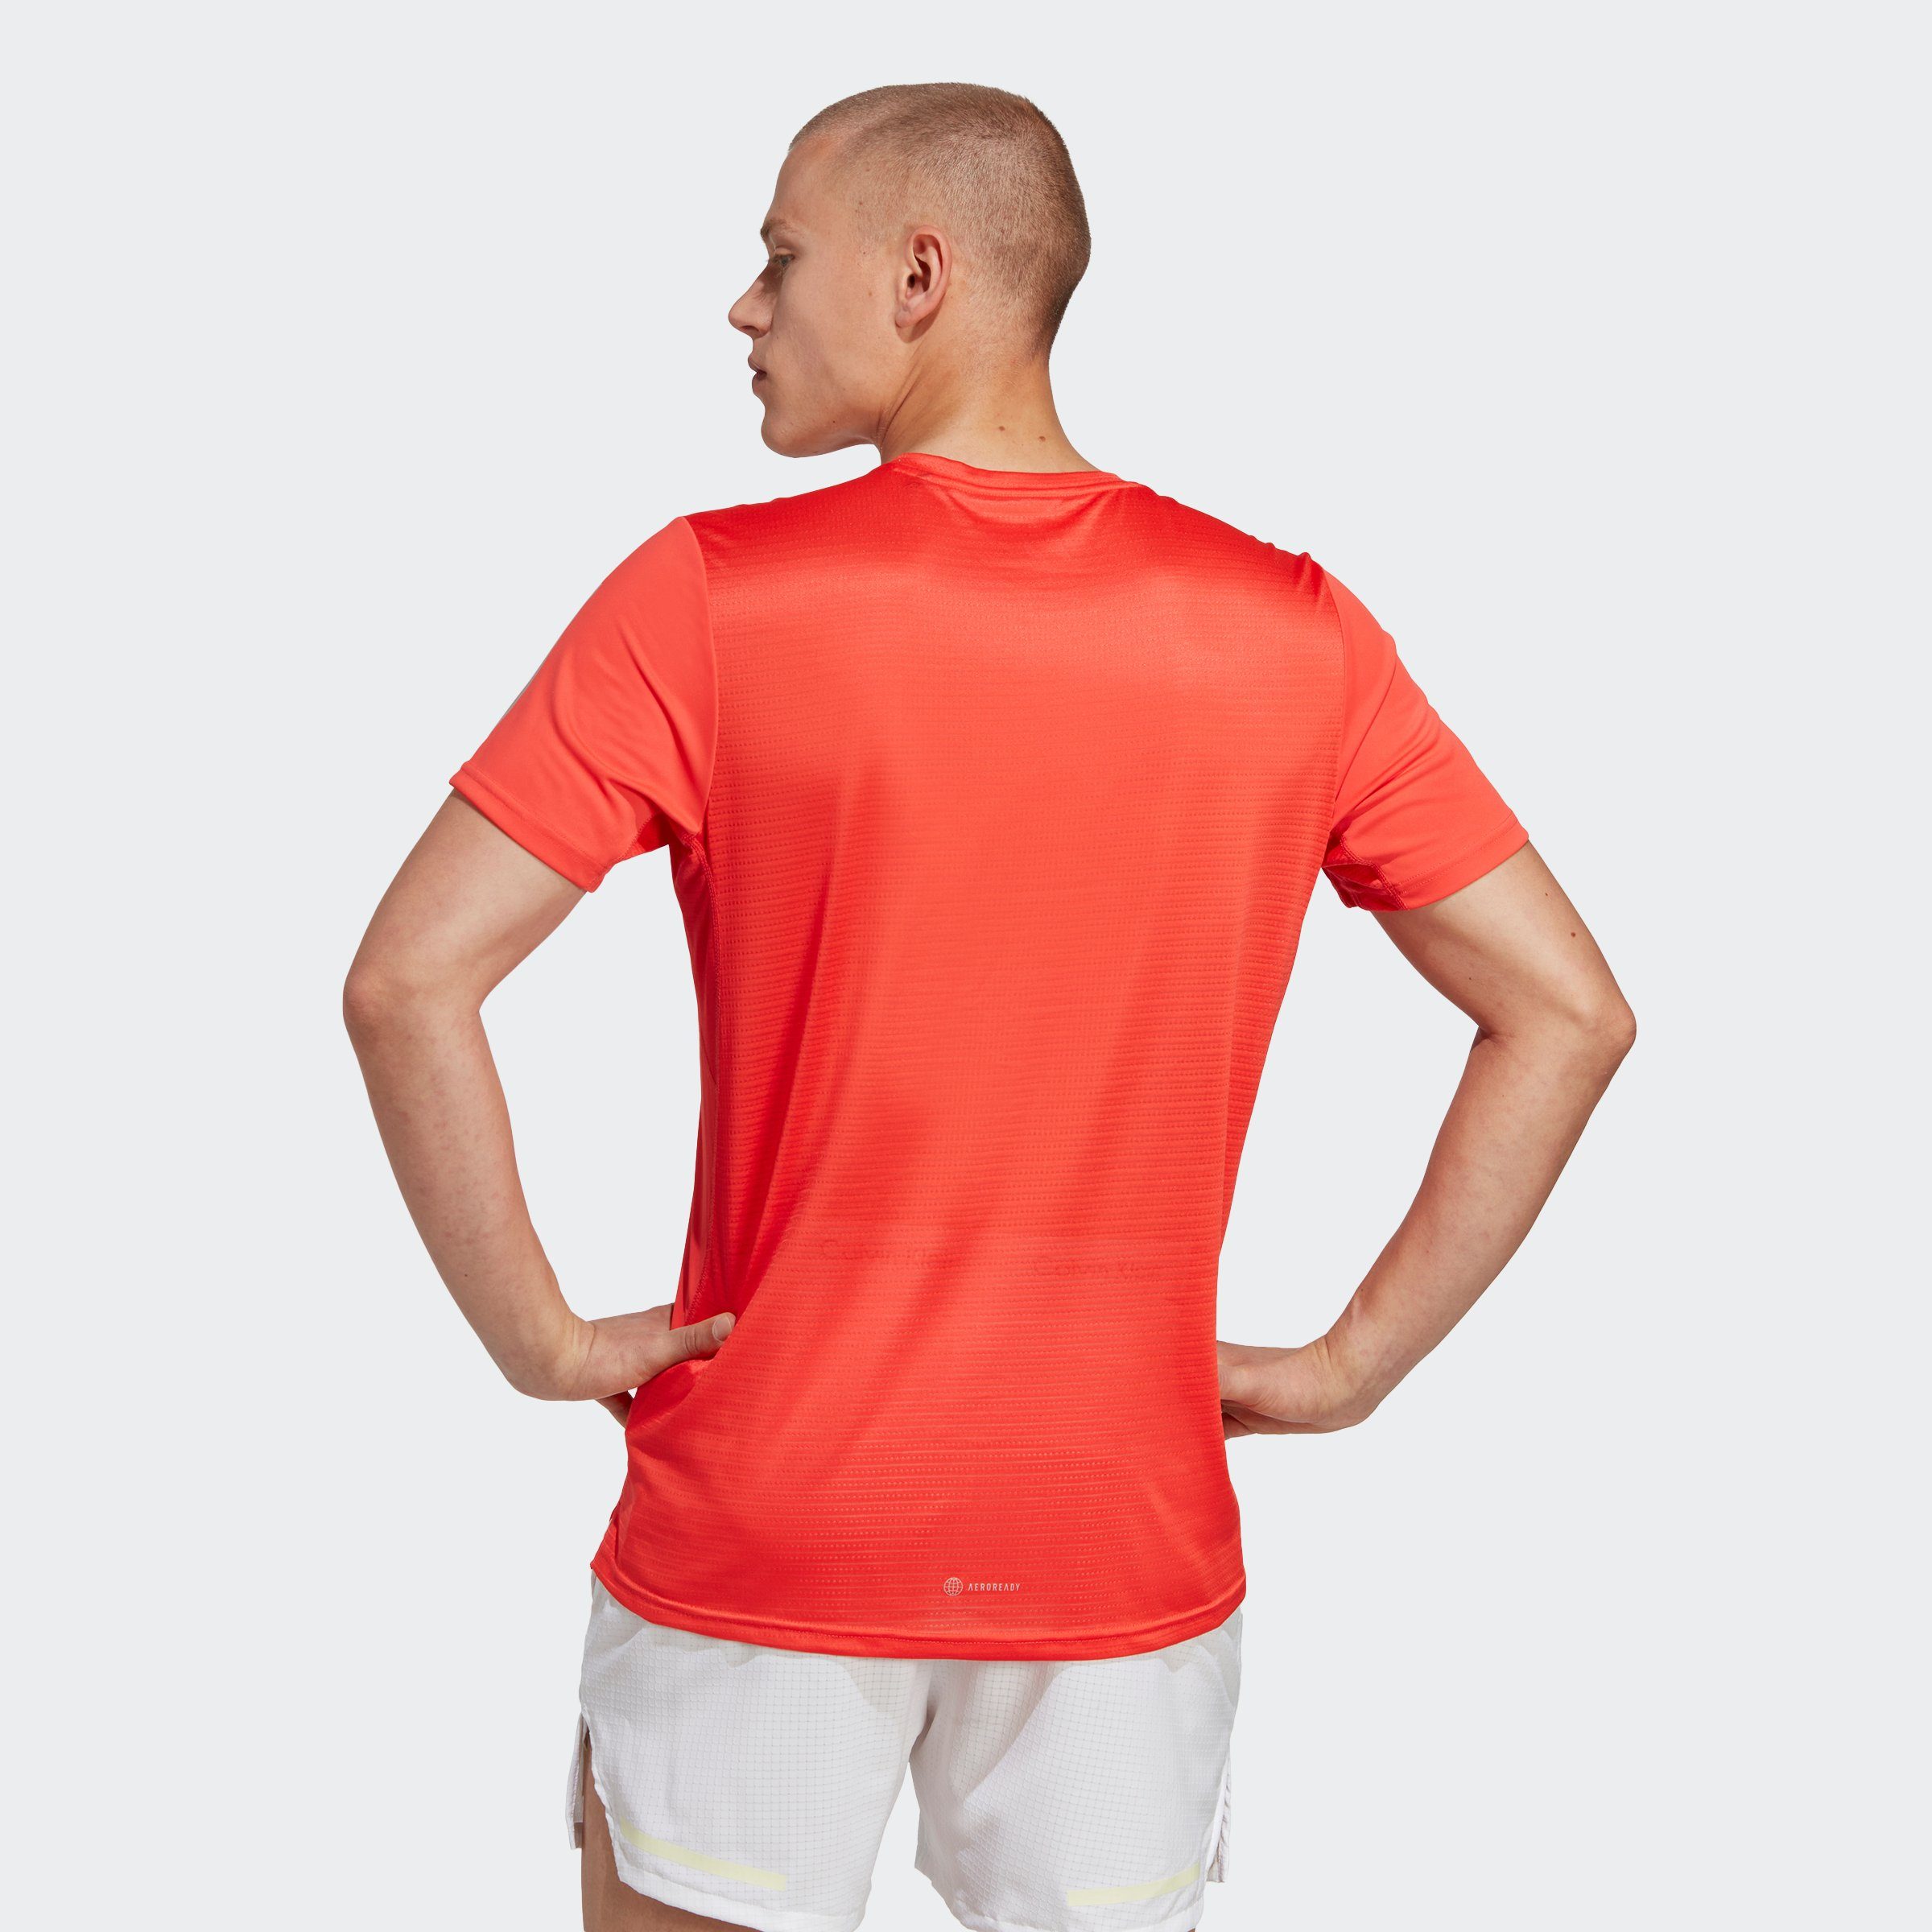 Laufshirt Reflective Performance adidas Bright Silver / THE Red OWN RUN